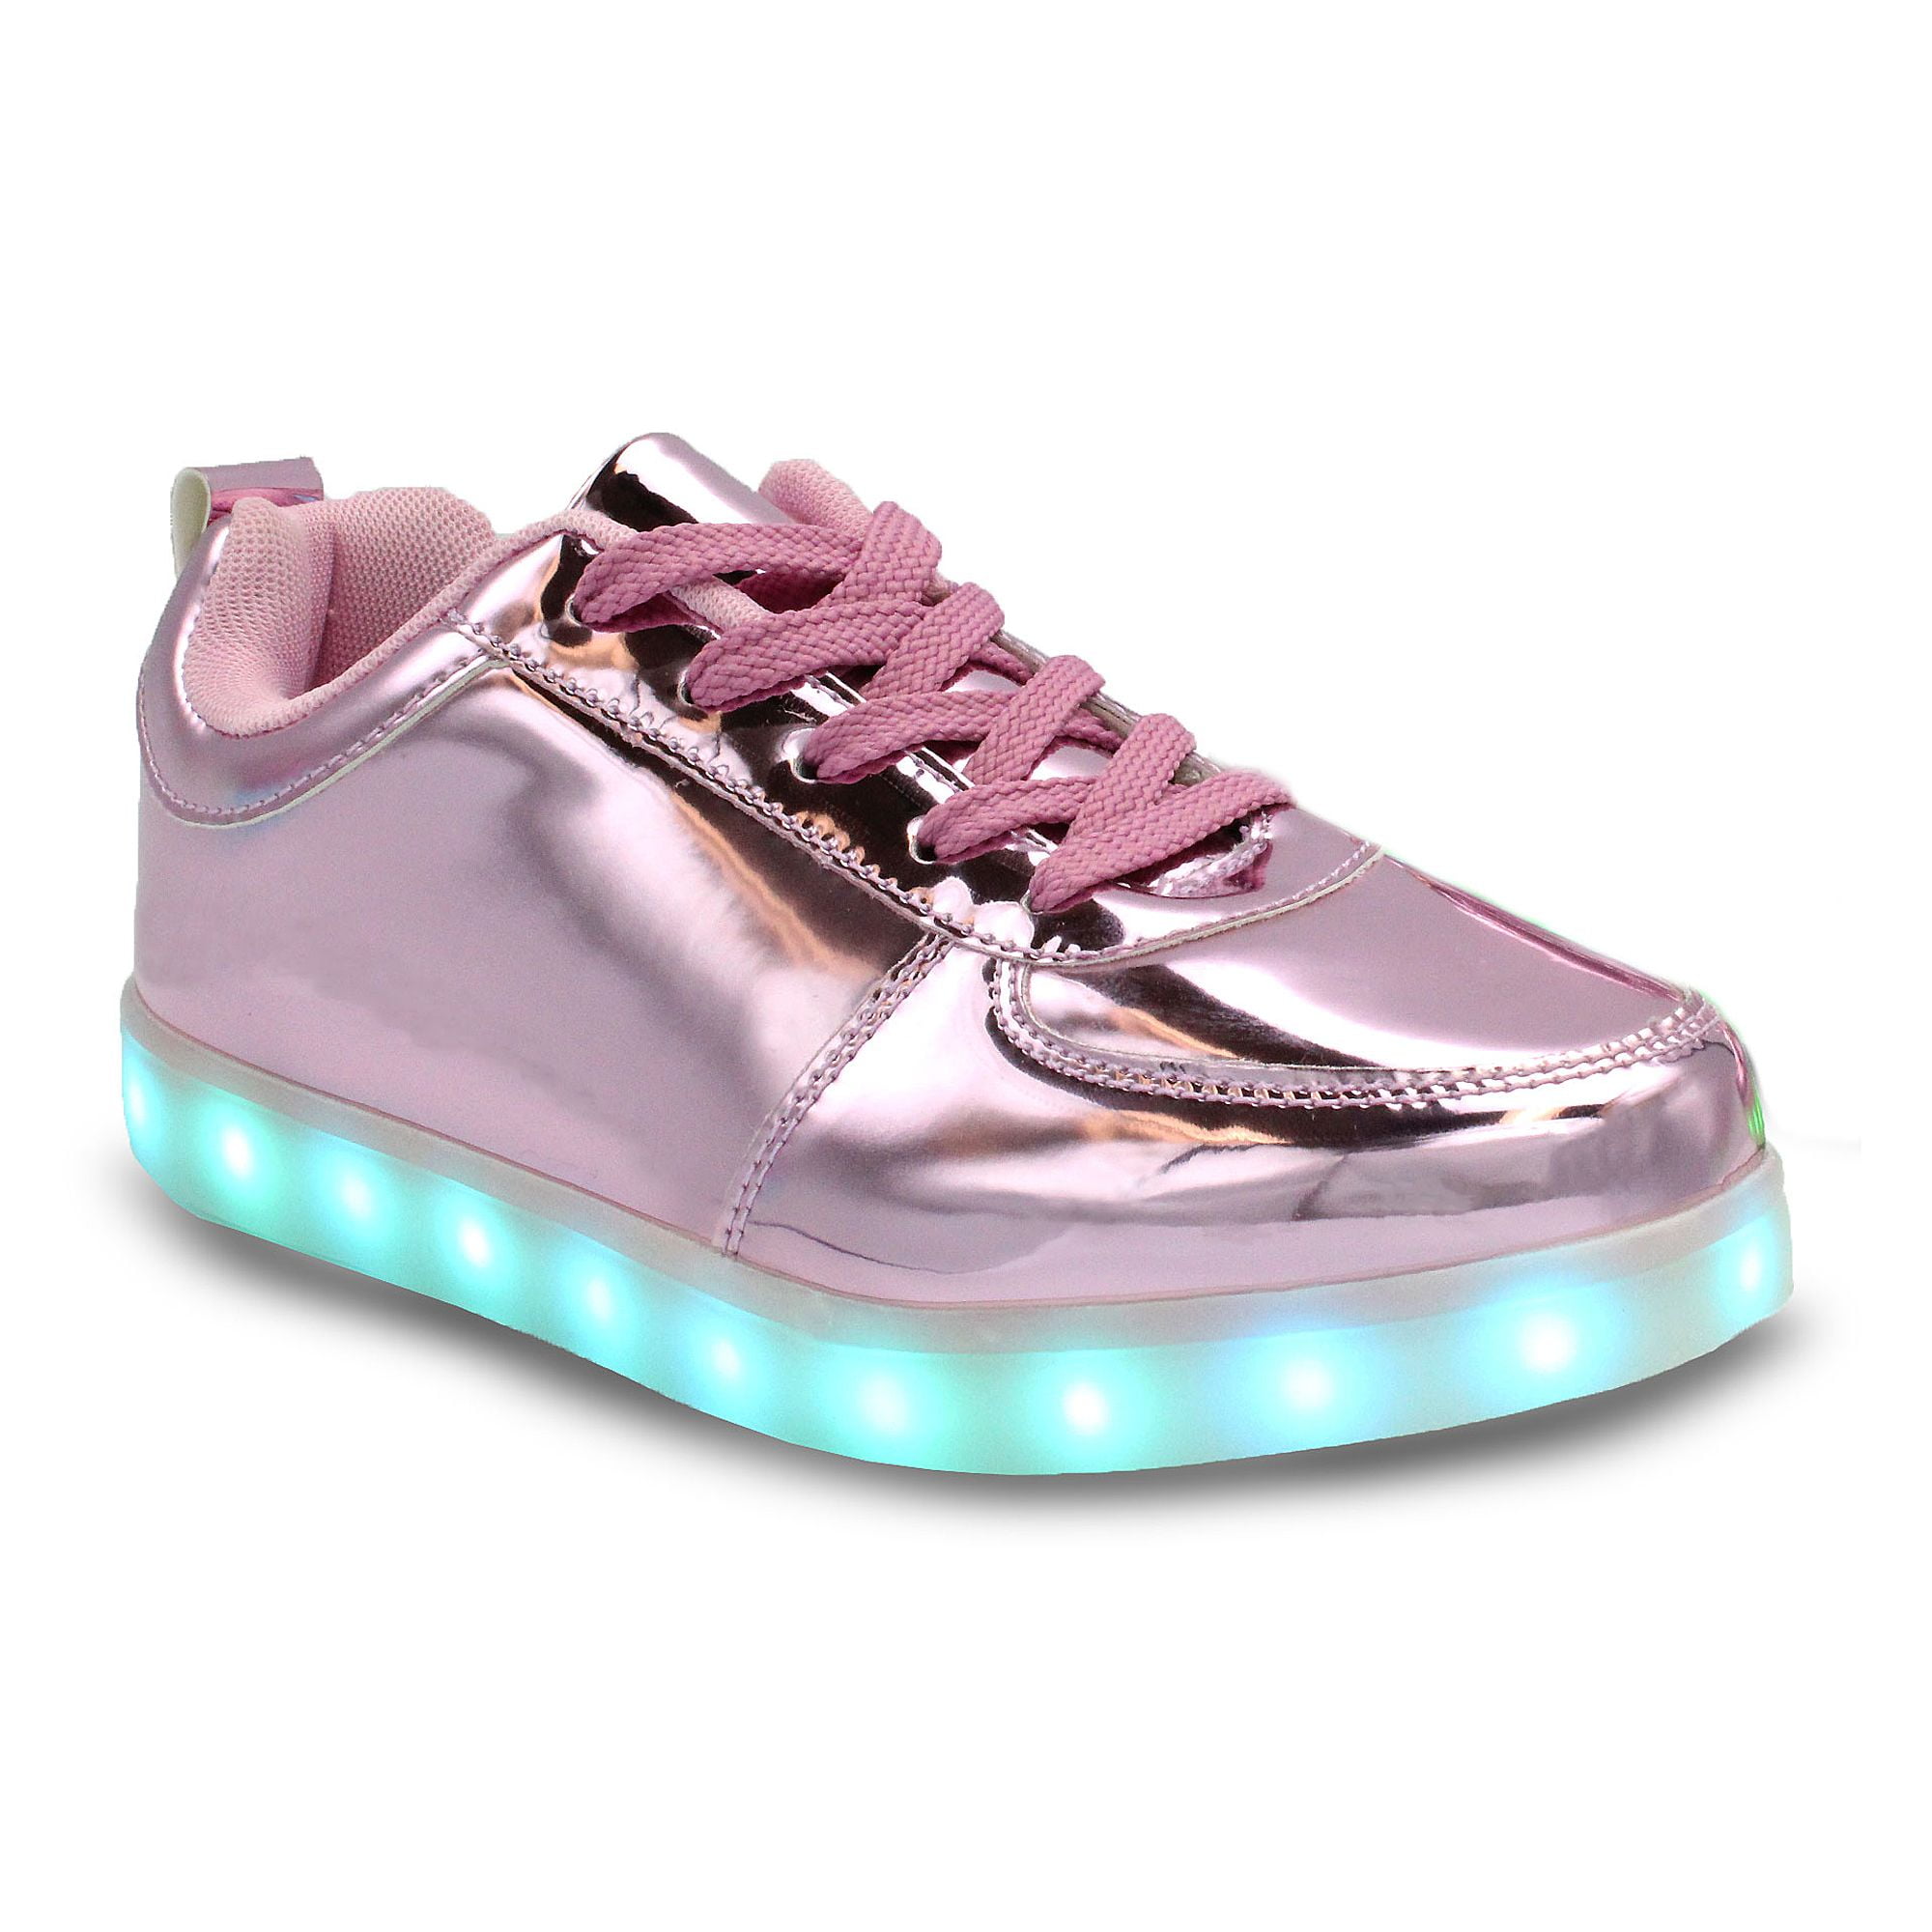 Family Smiles - LED Light Up Sneakers Kids Low Top USB Charging Boys ...